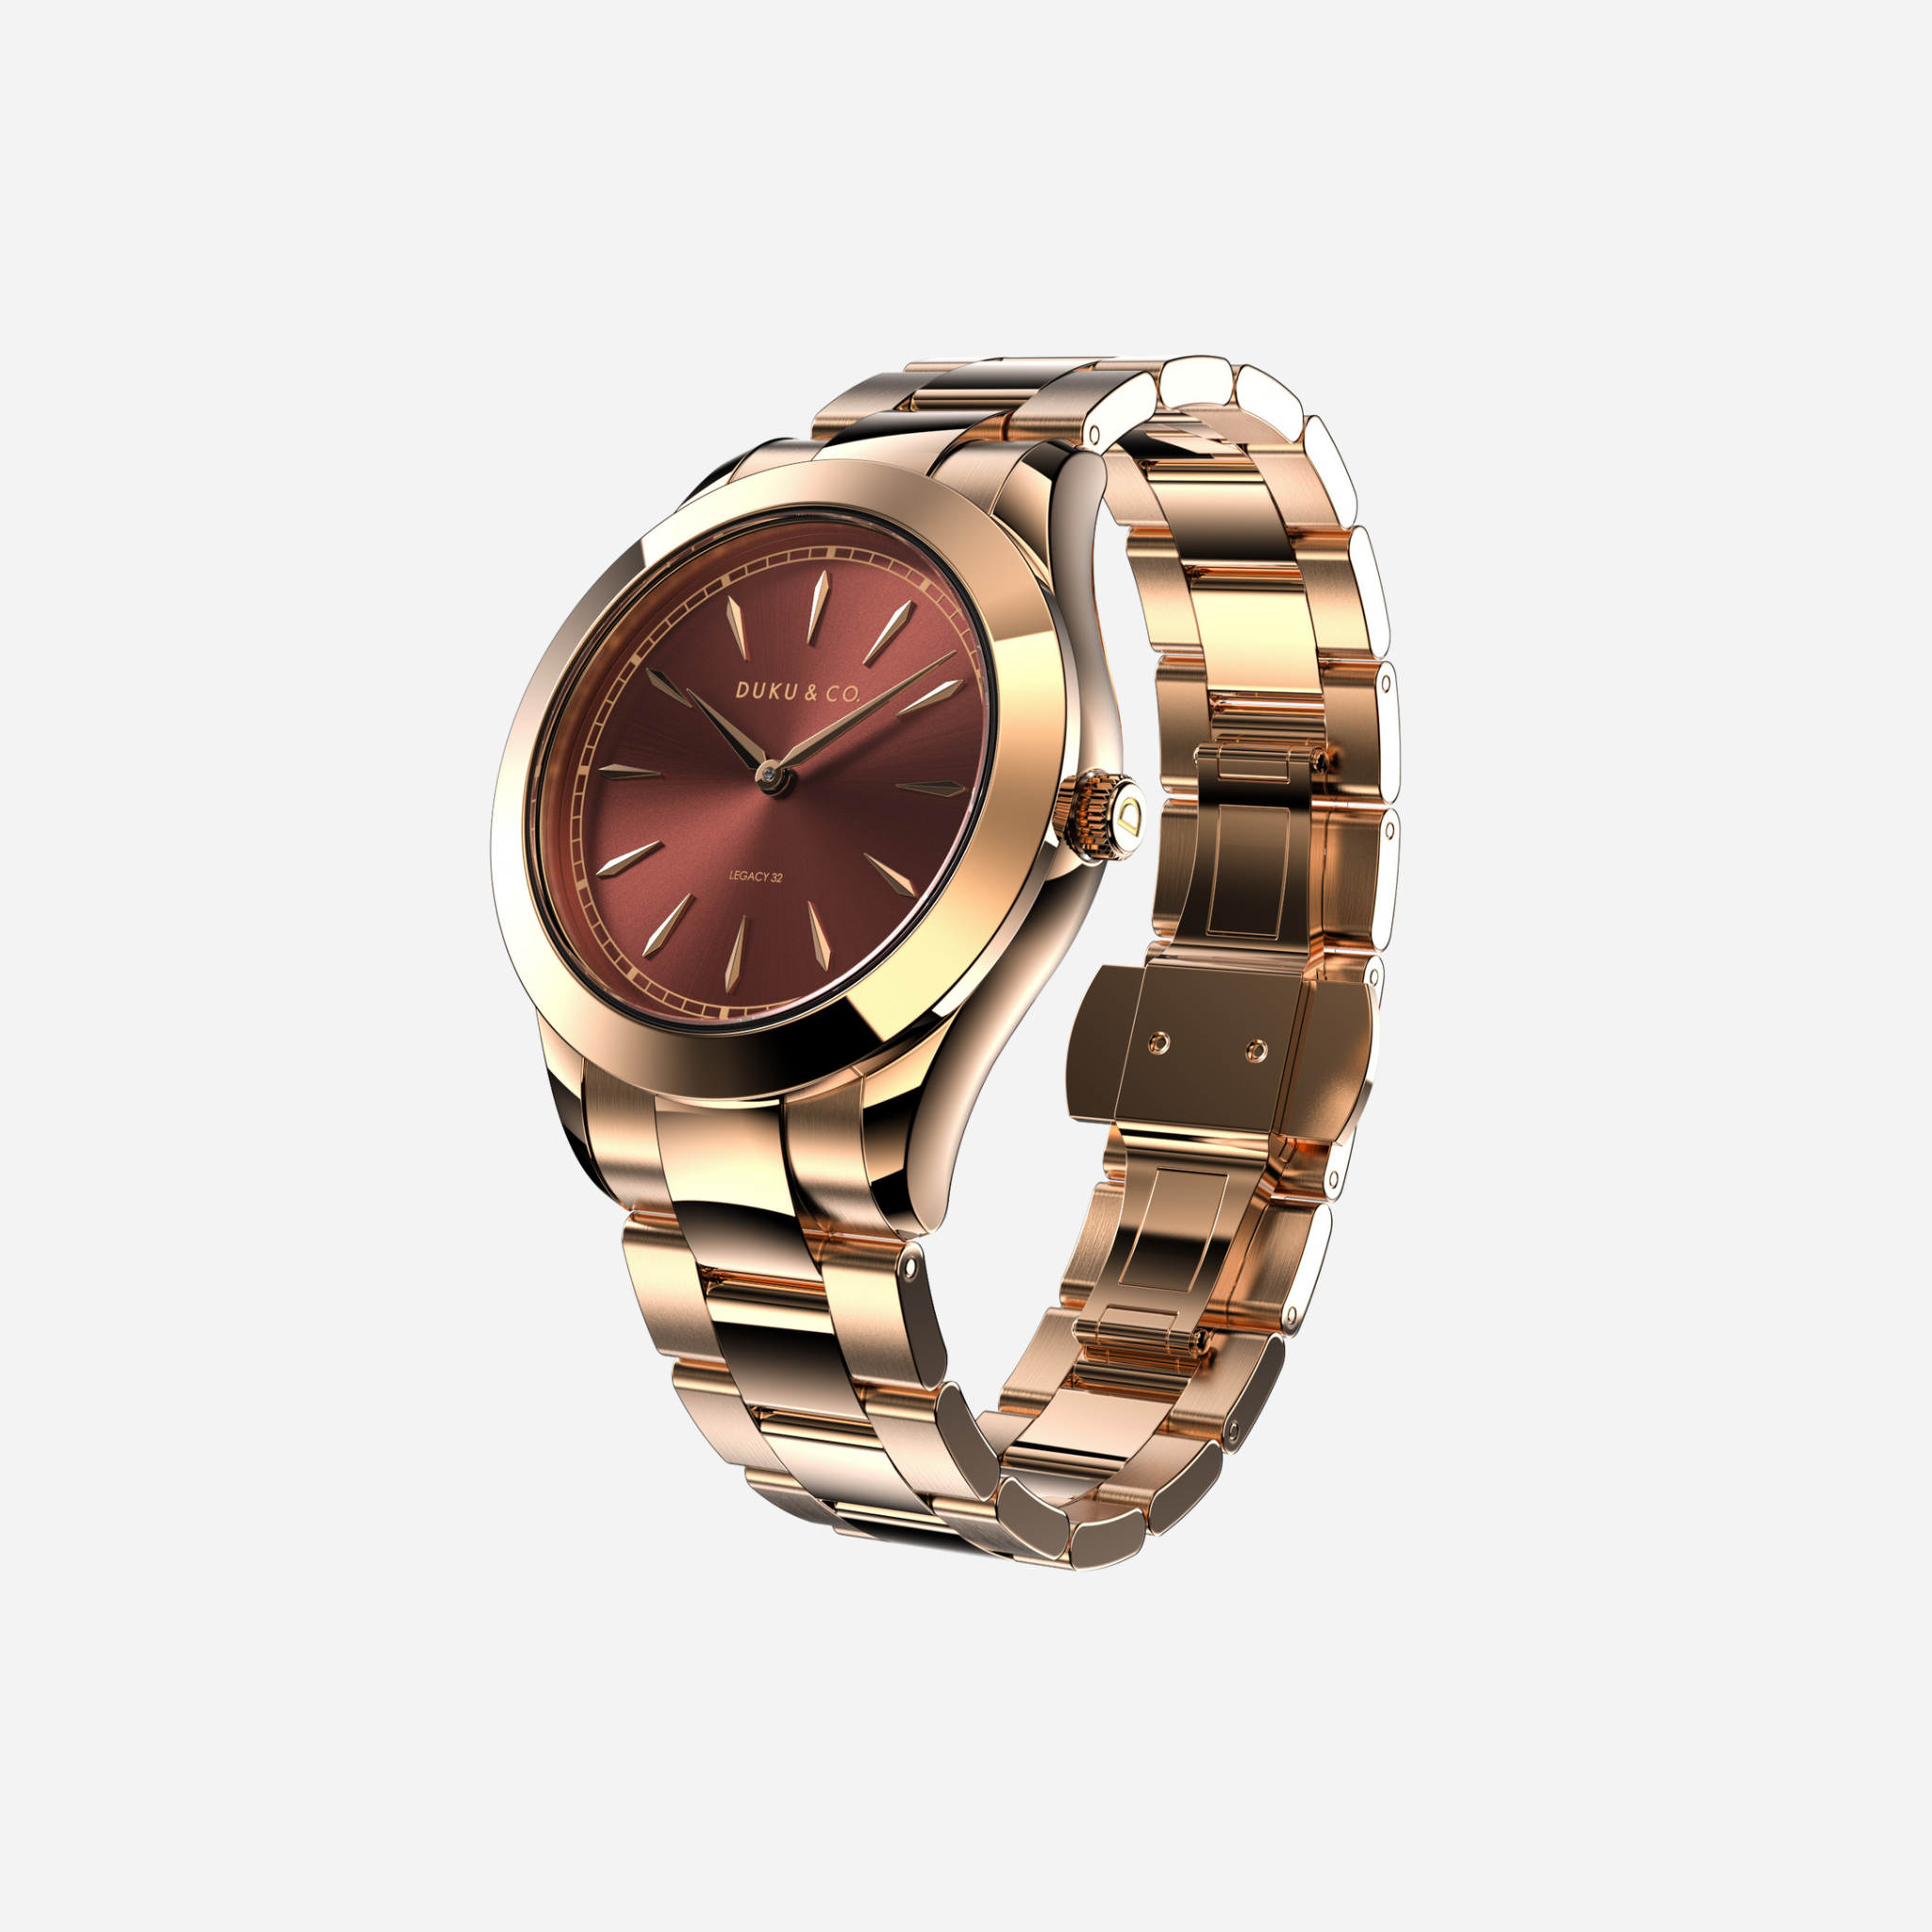 Rose gold and Wine stainless steel watch from Duku & Co.